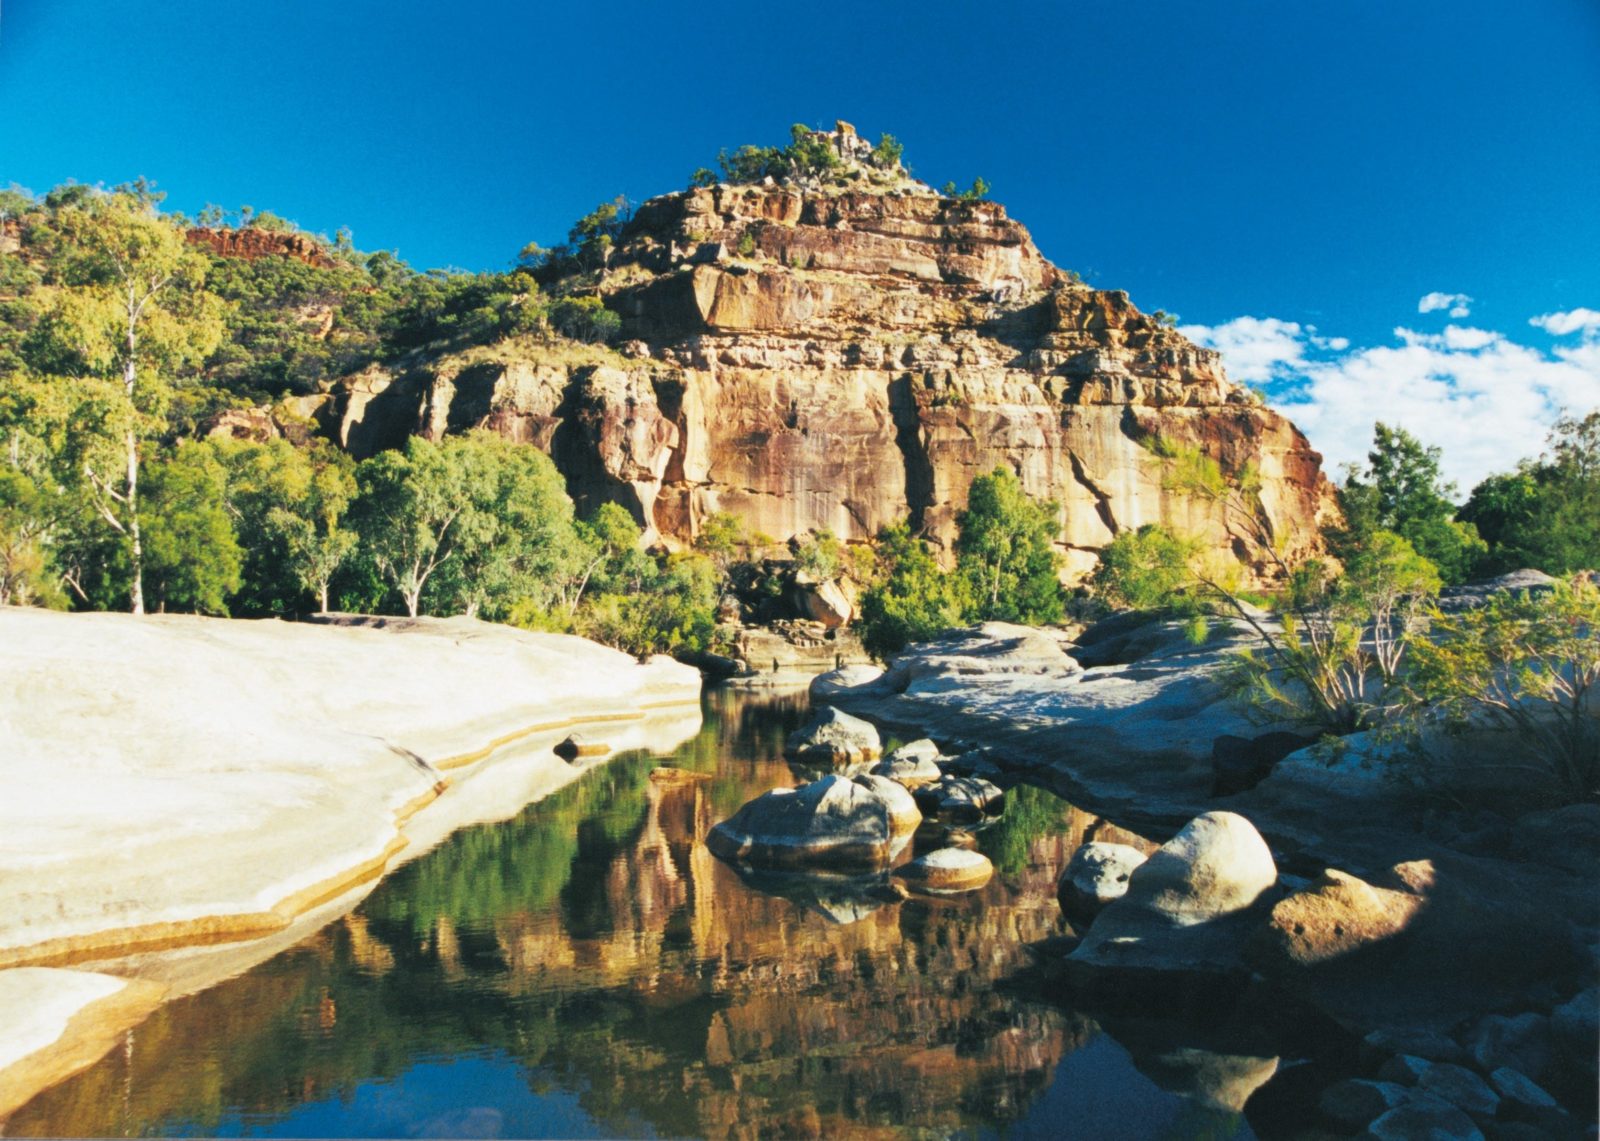 A pyramid-like sandstone formation towers over a small creek with boulders, fringed by vegetation.